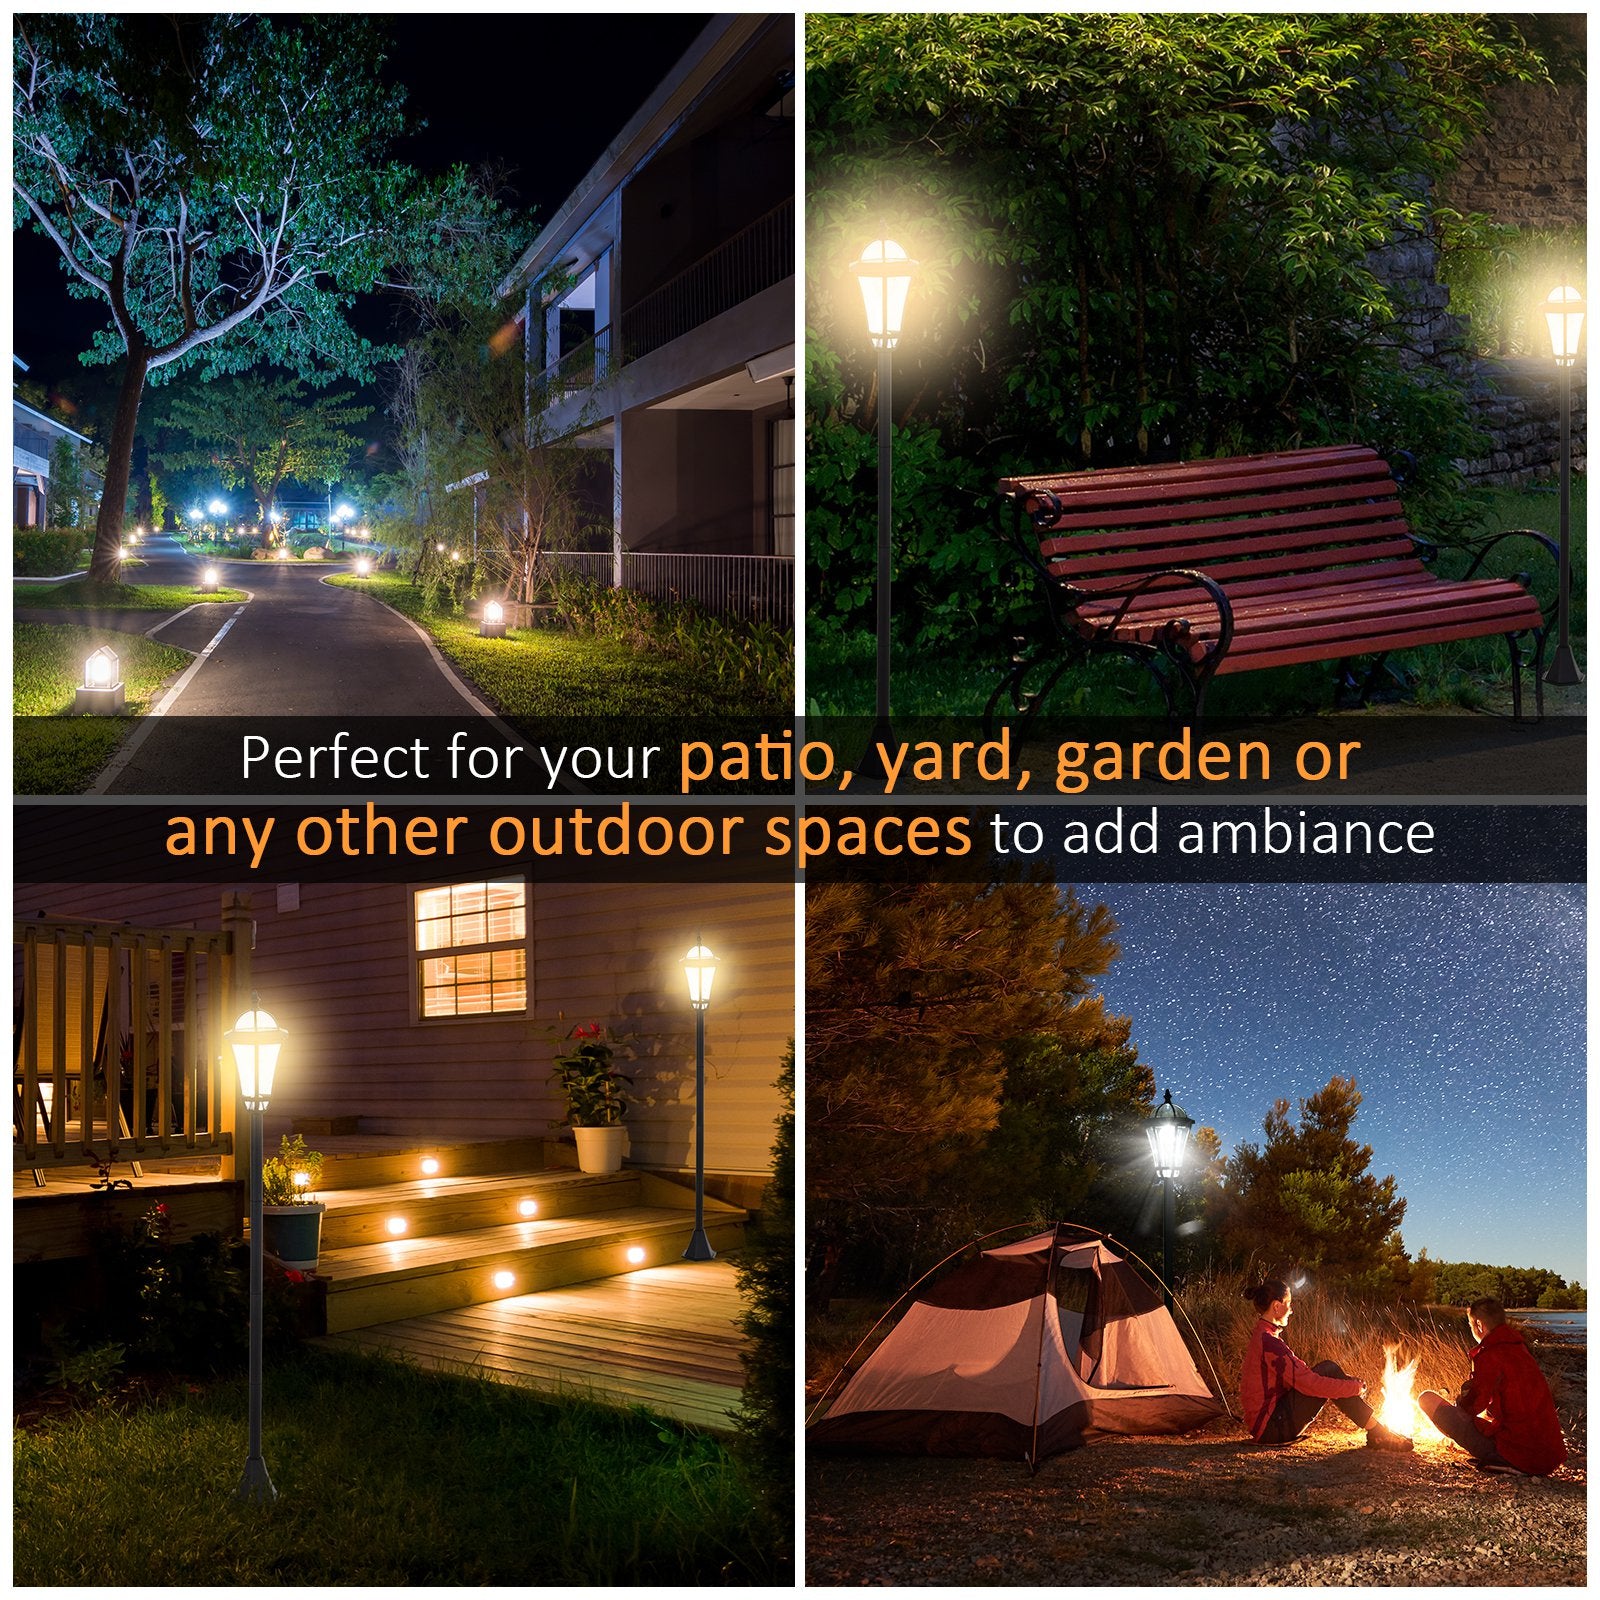 Outsunny 2 PCS LED Garden Lights Lamp Post Solar Powered Lantern Patio Pathway Walkway Outdoor Water-Resist Auto Switch 6-8 Hours Black - Inspirely